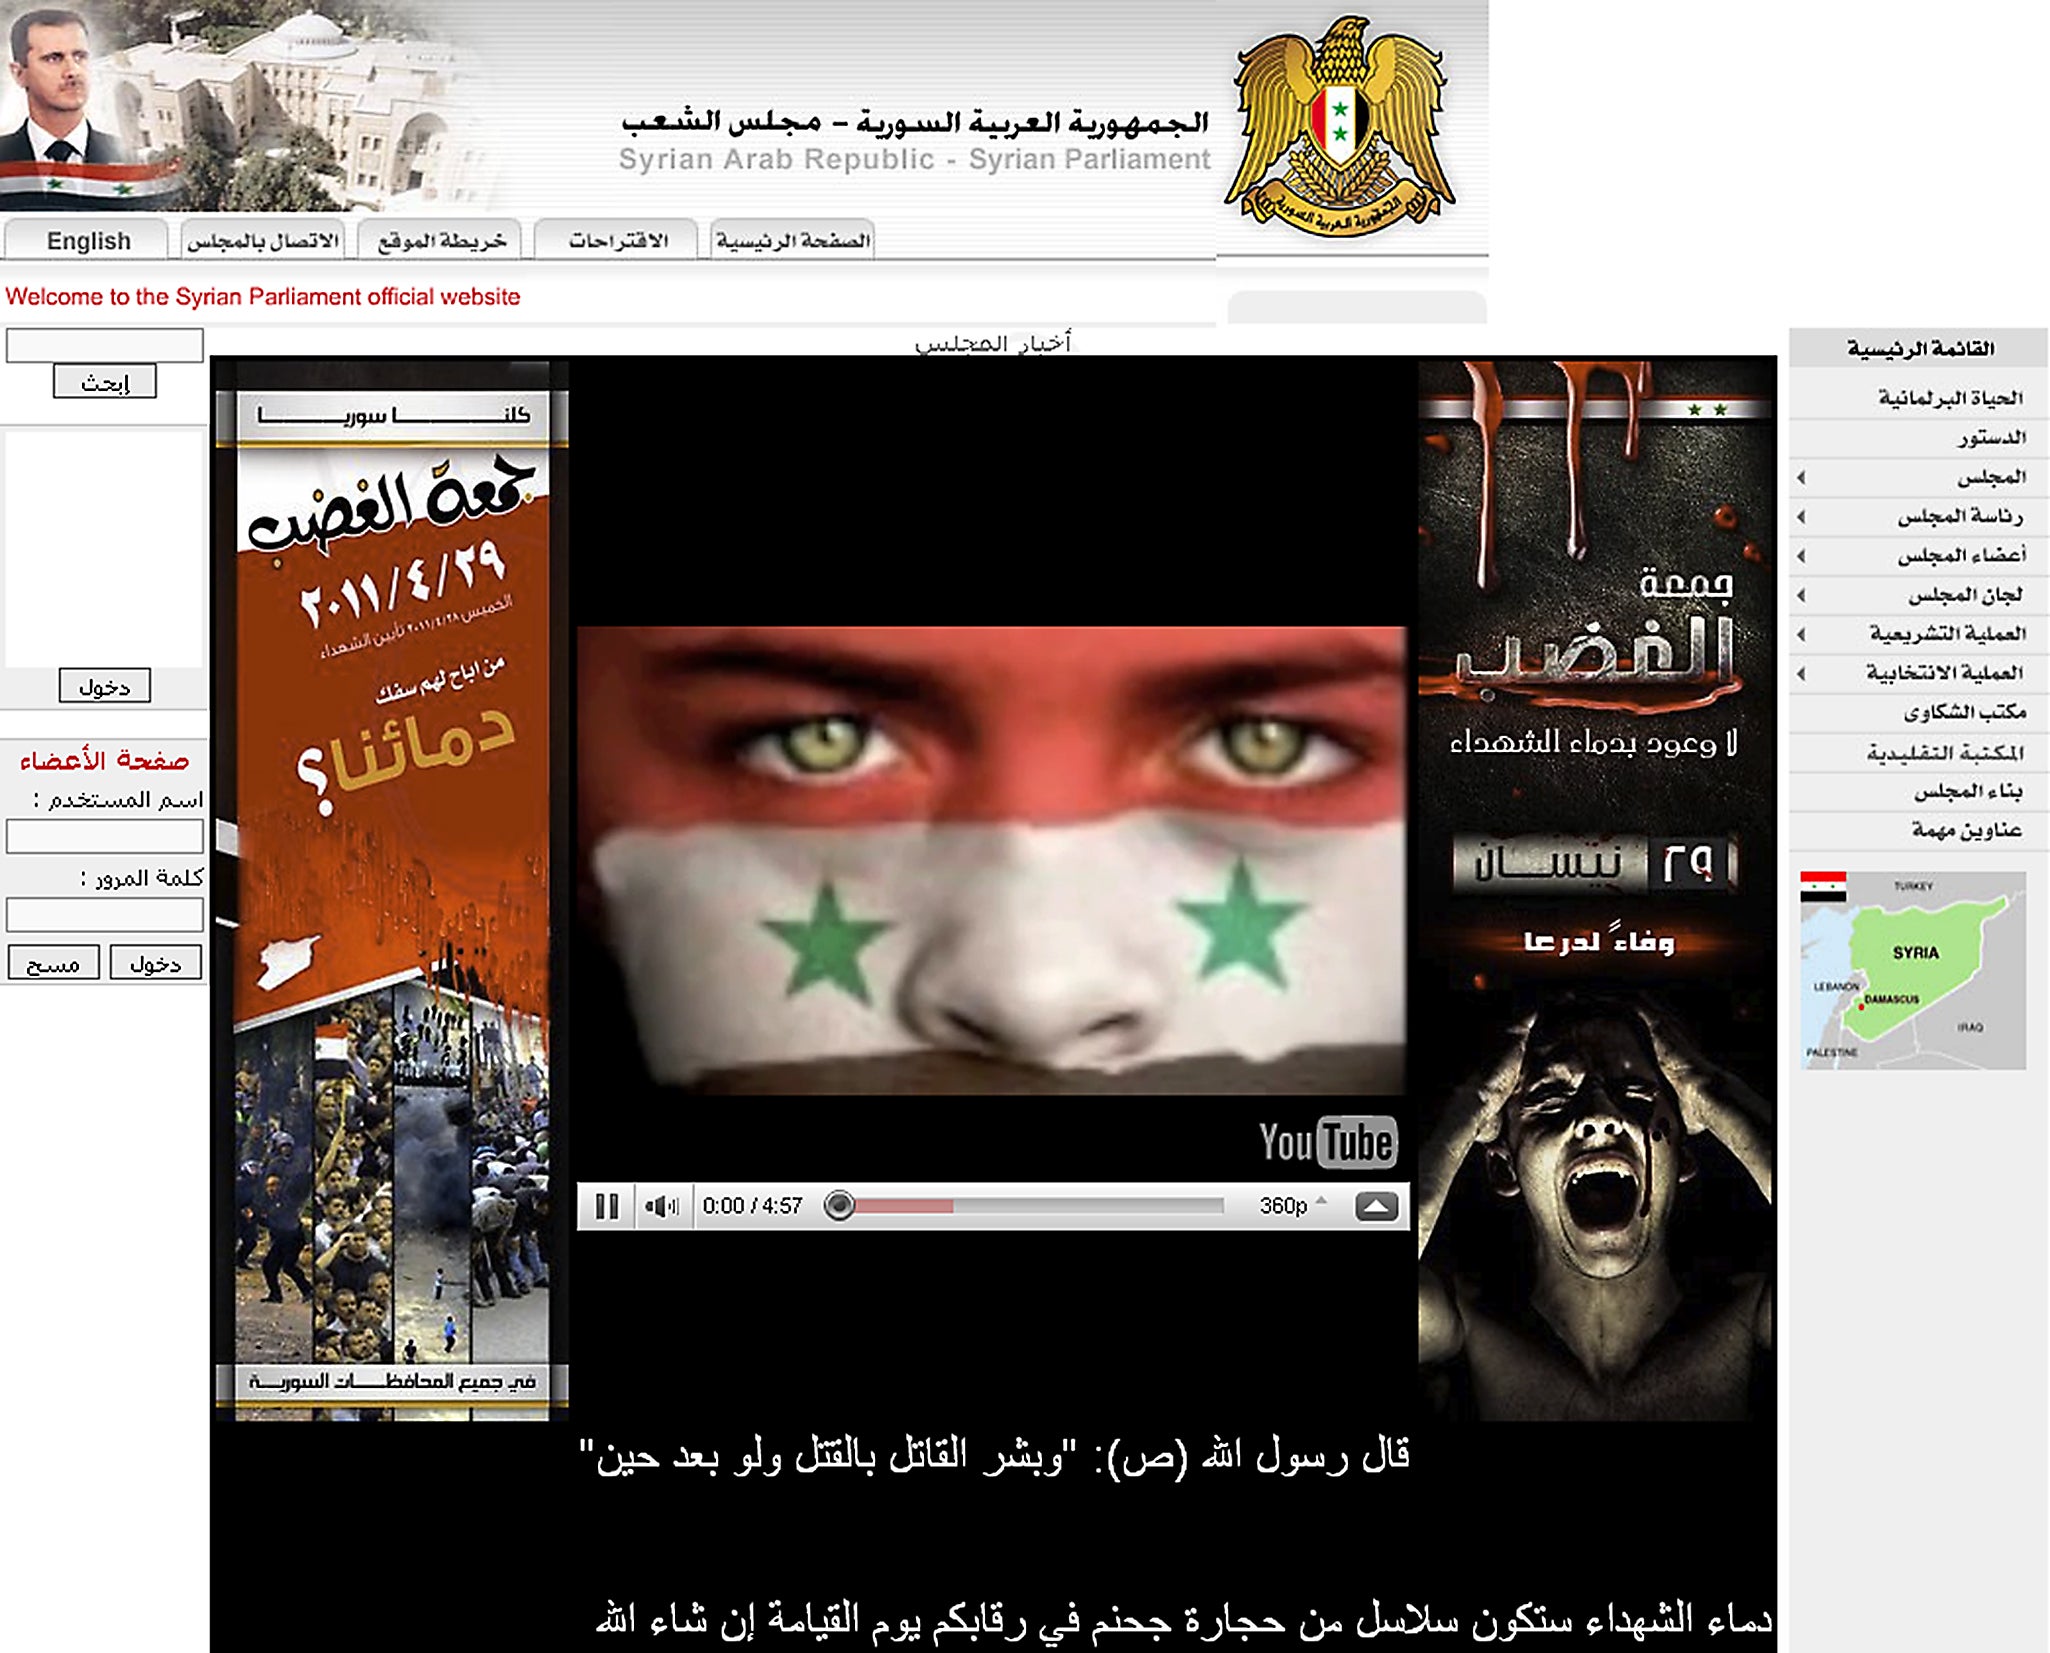 The Syrian Electronic Army have hacked many Western news sites, including the Financial Times and the BBC